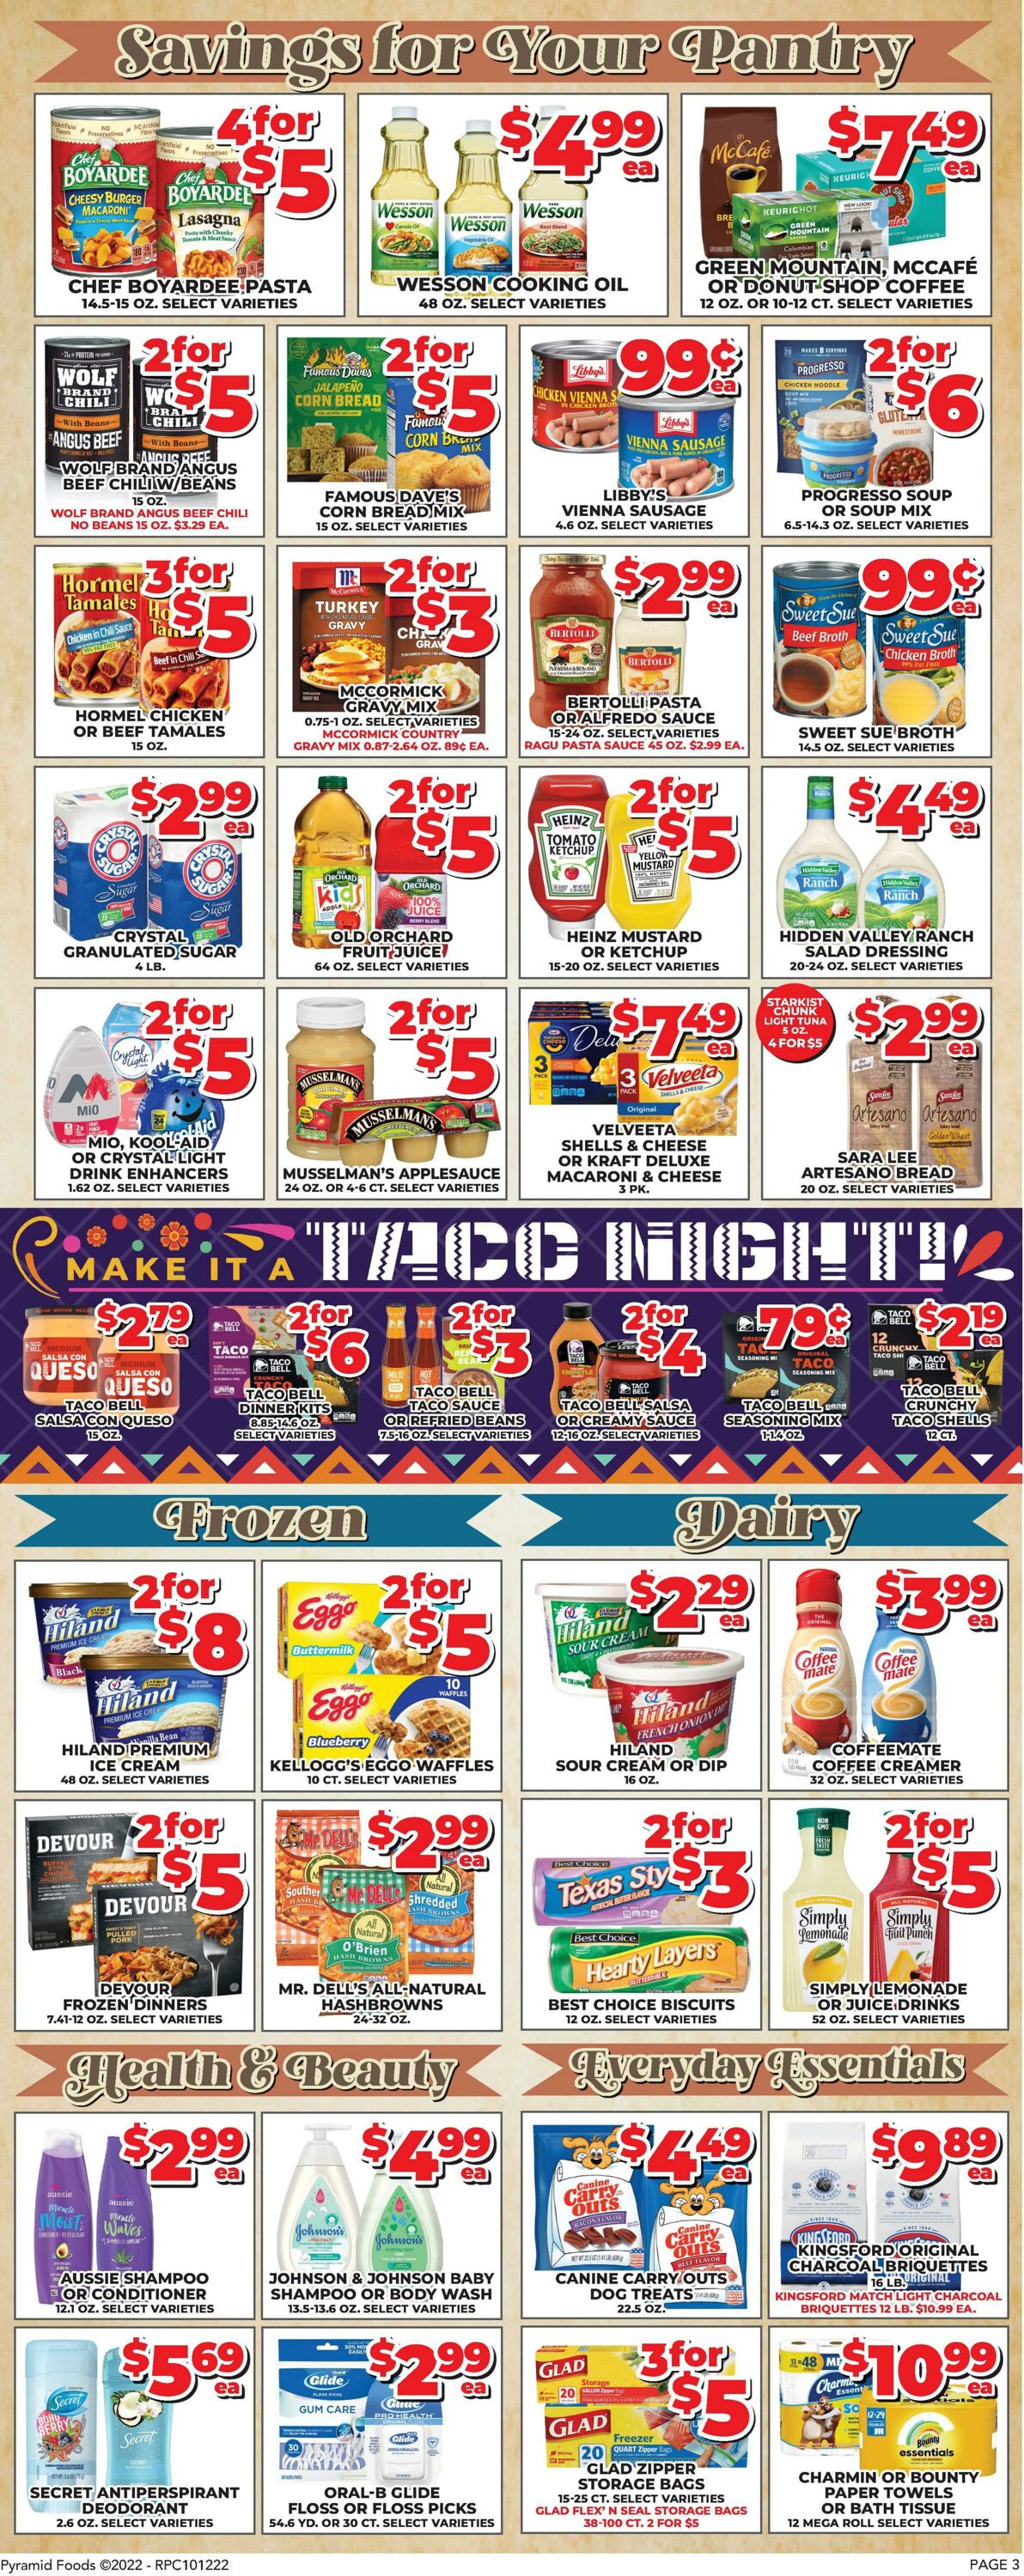 Weekly ad Price Cutter 10/12/2022 - 10/18/2022